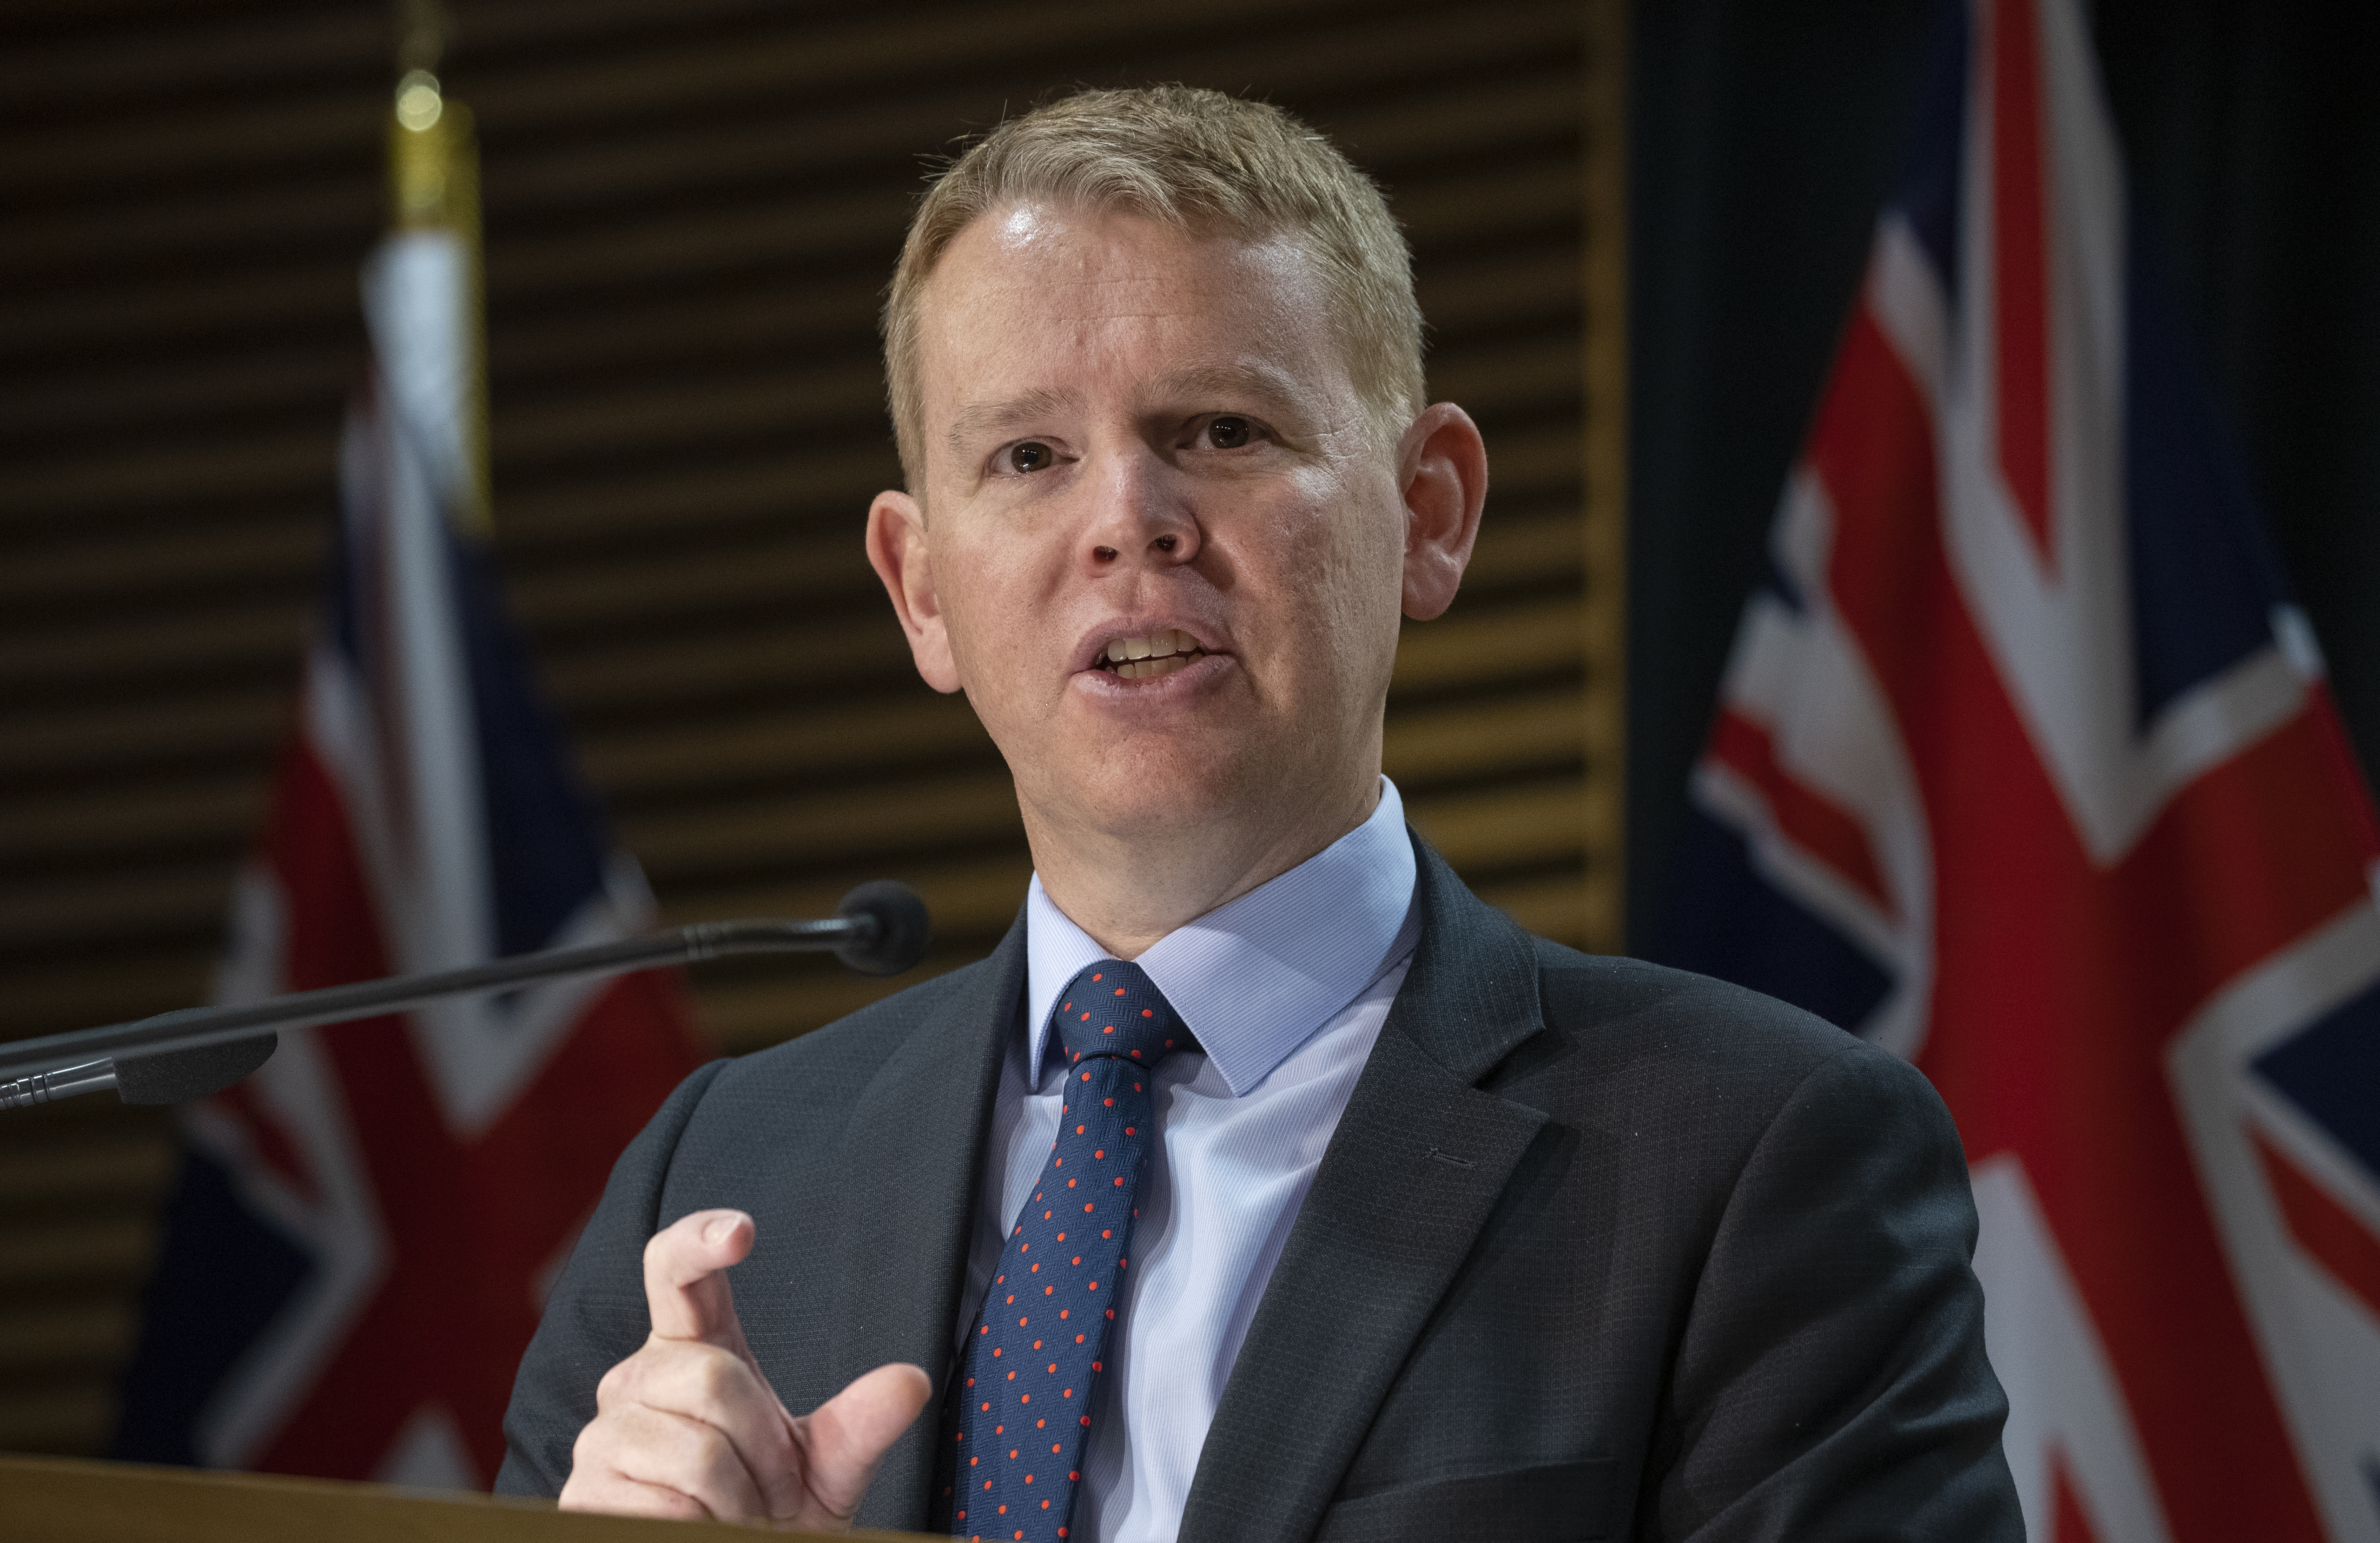 COVID-19 Response Minister Chris Hipkins speaks during a COVID-19 response update in Parliament on November 24, 2021 in Wellington, New Zealand. 